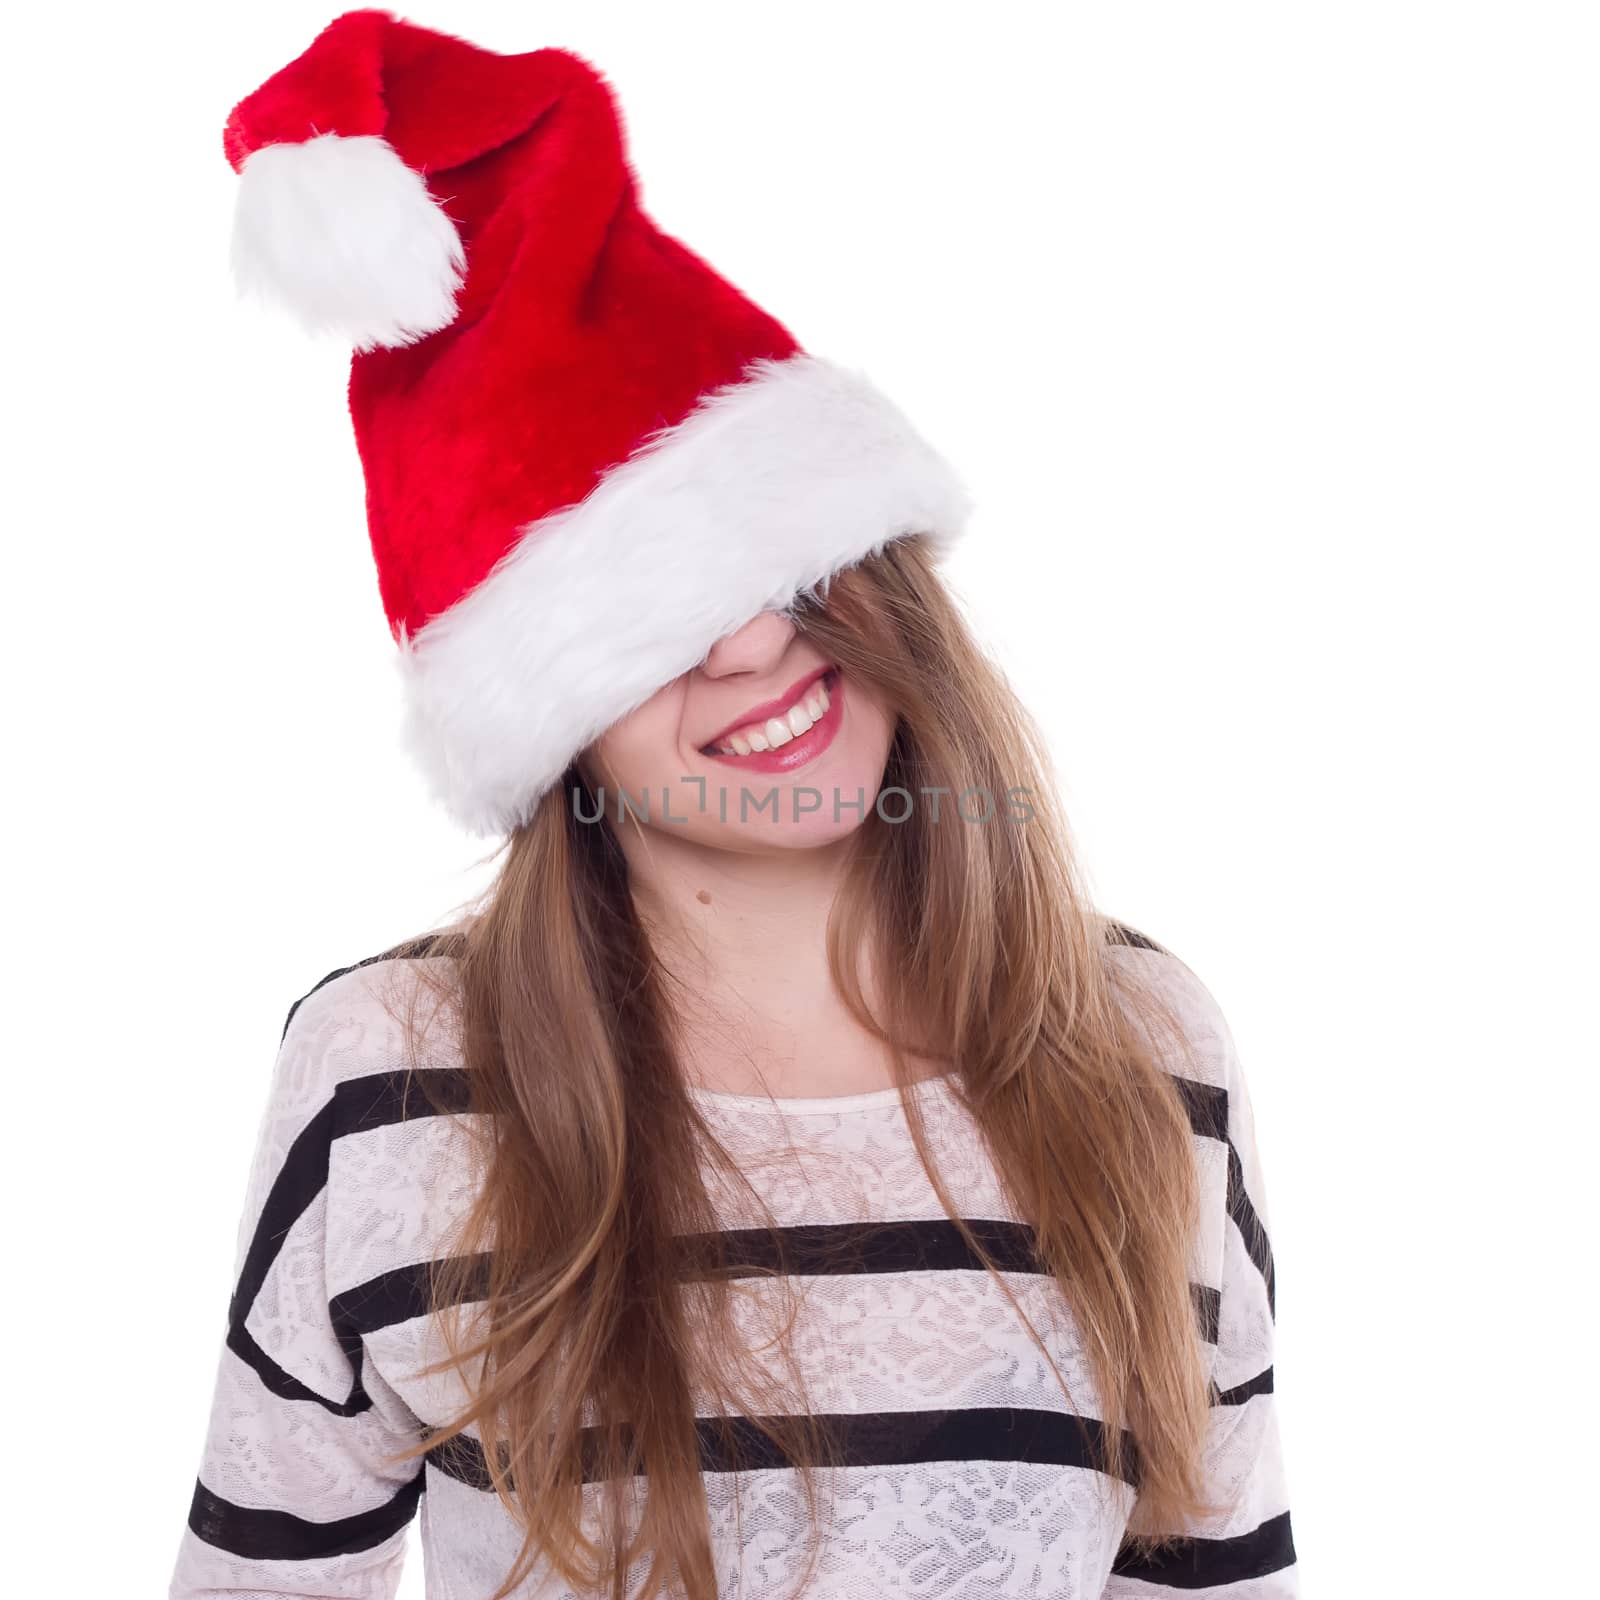 Expressive emotional girl in a Christmas hat on white background by victosha